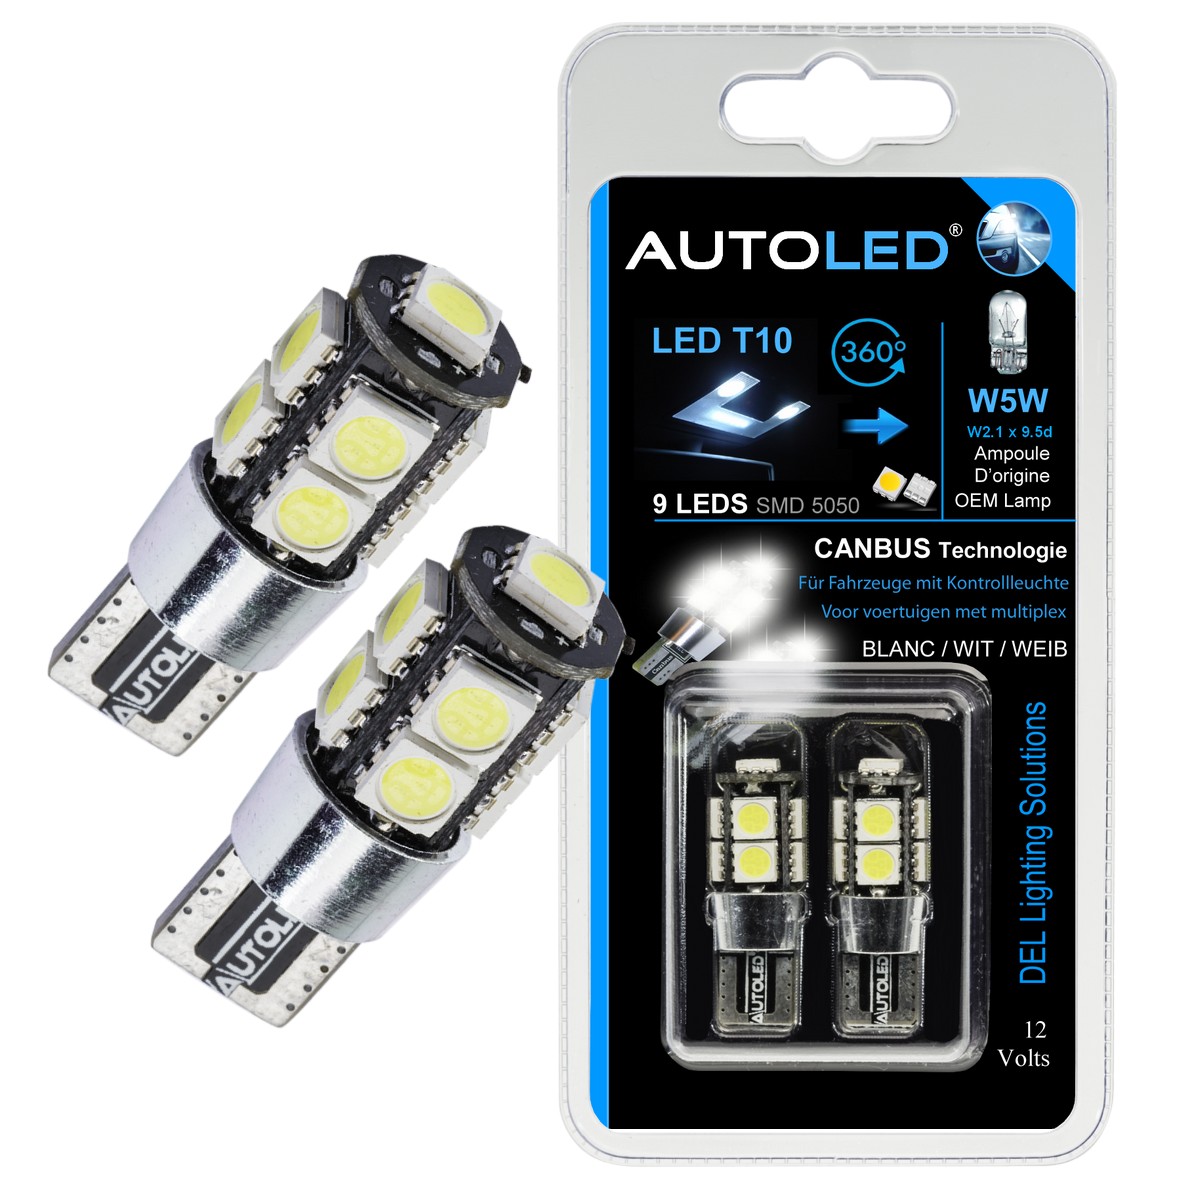 LED 22 SMD P21W BA15S Canbus 12V Feux Ampoules Ariere Blanc